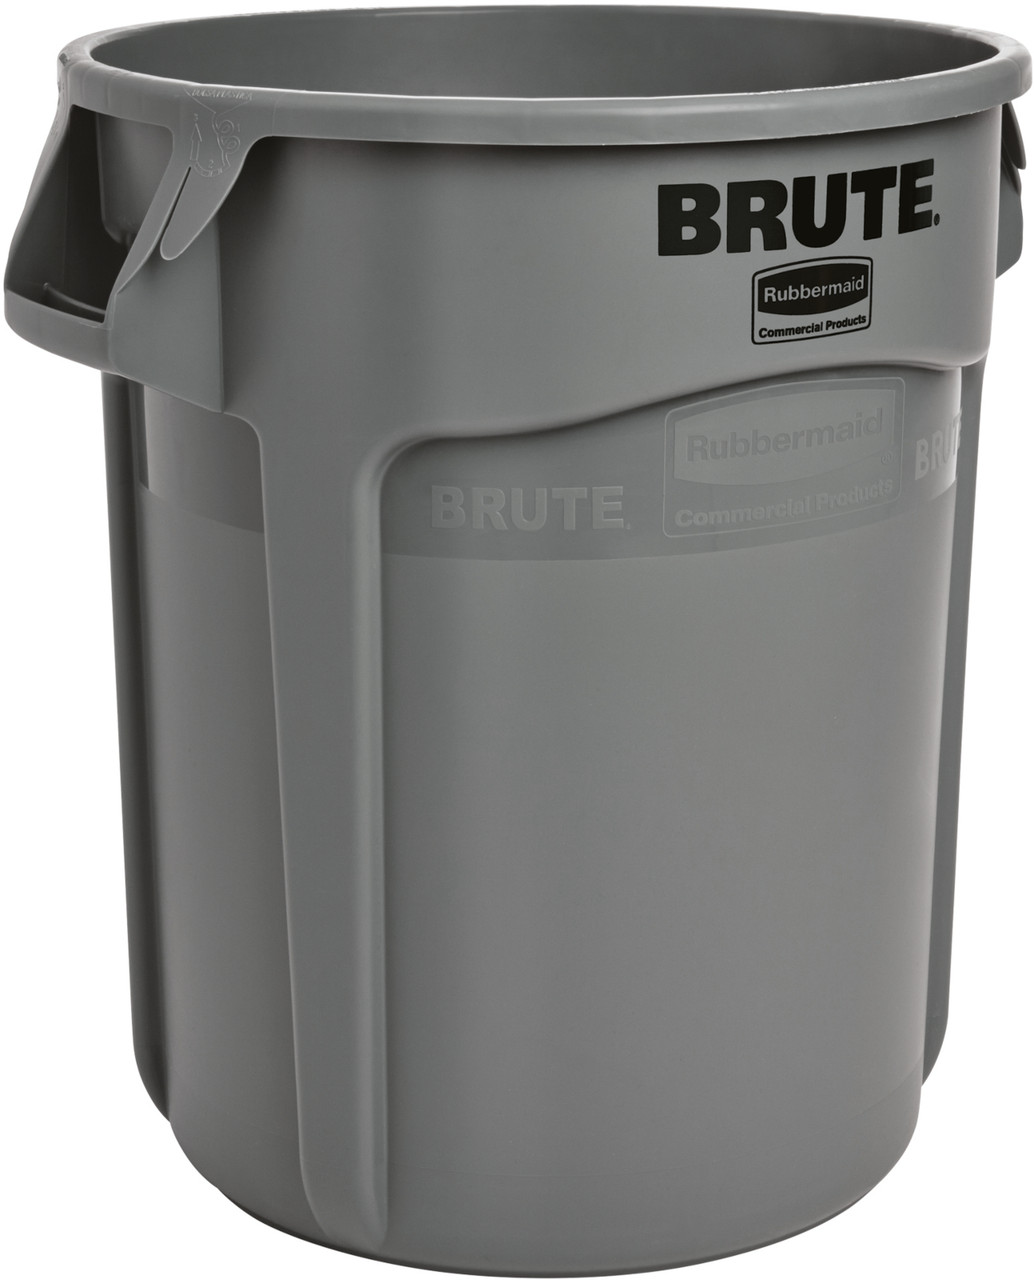 Rubbermaid BRUTE Container - 37.9 Ltr - Grey - FG261000GRAY